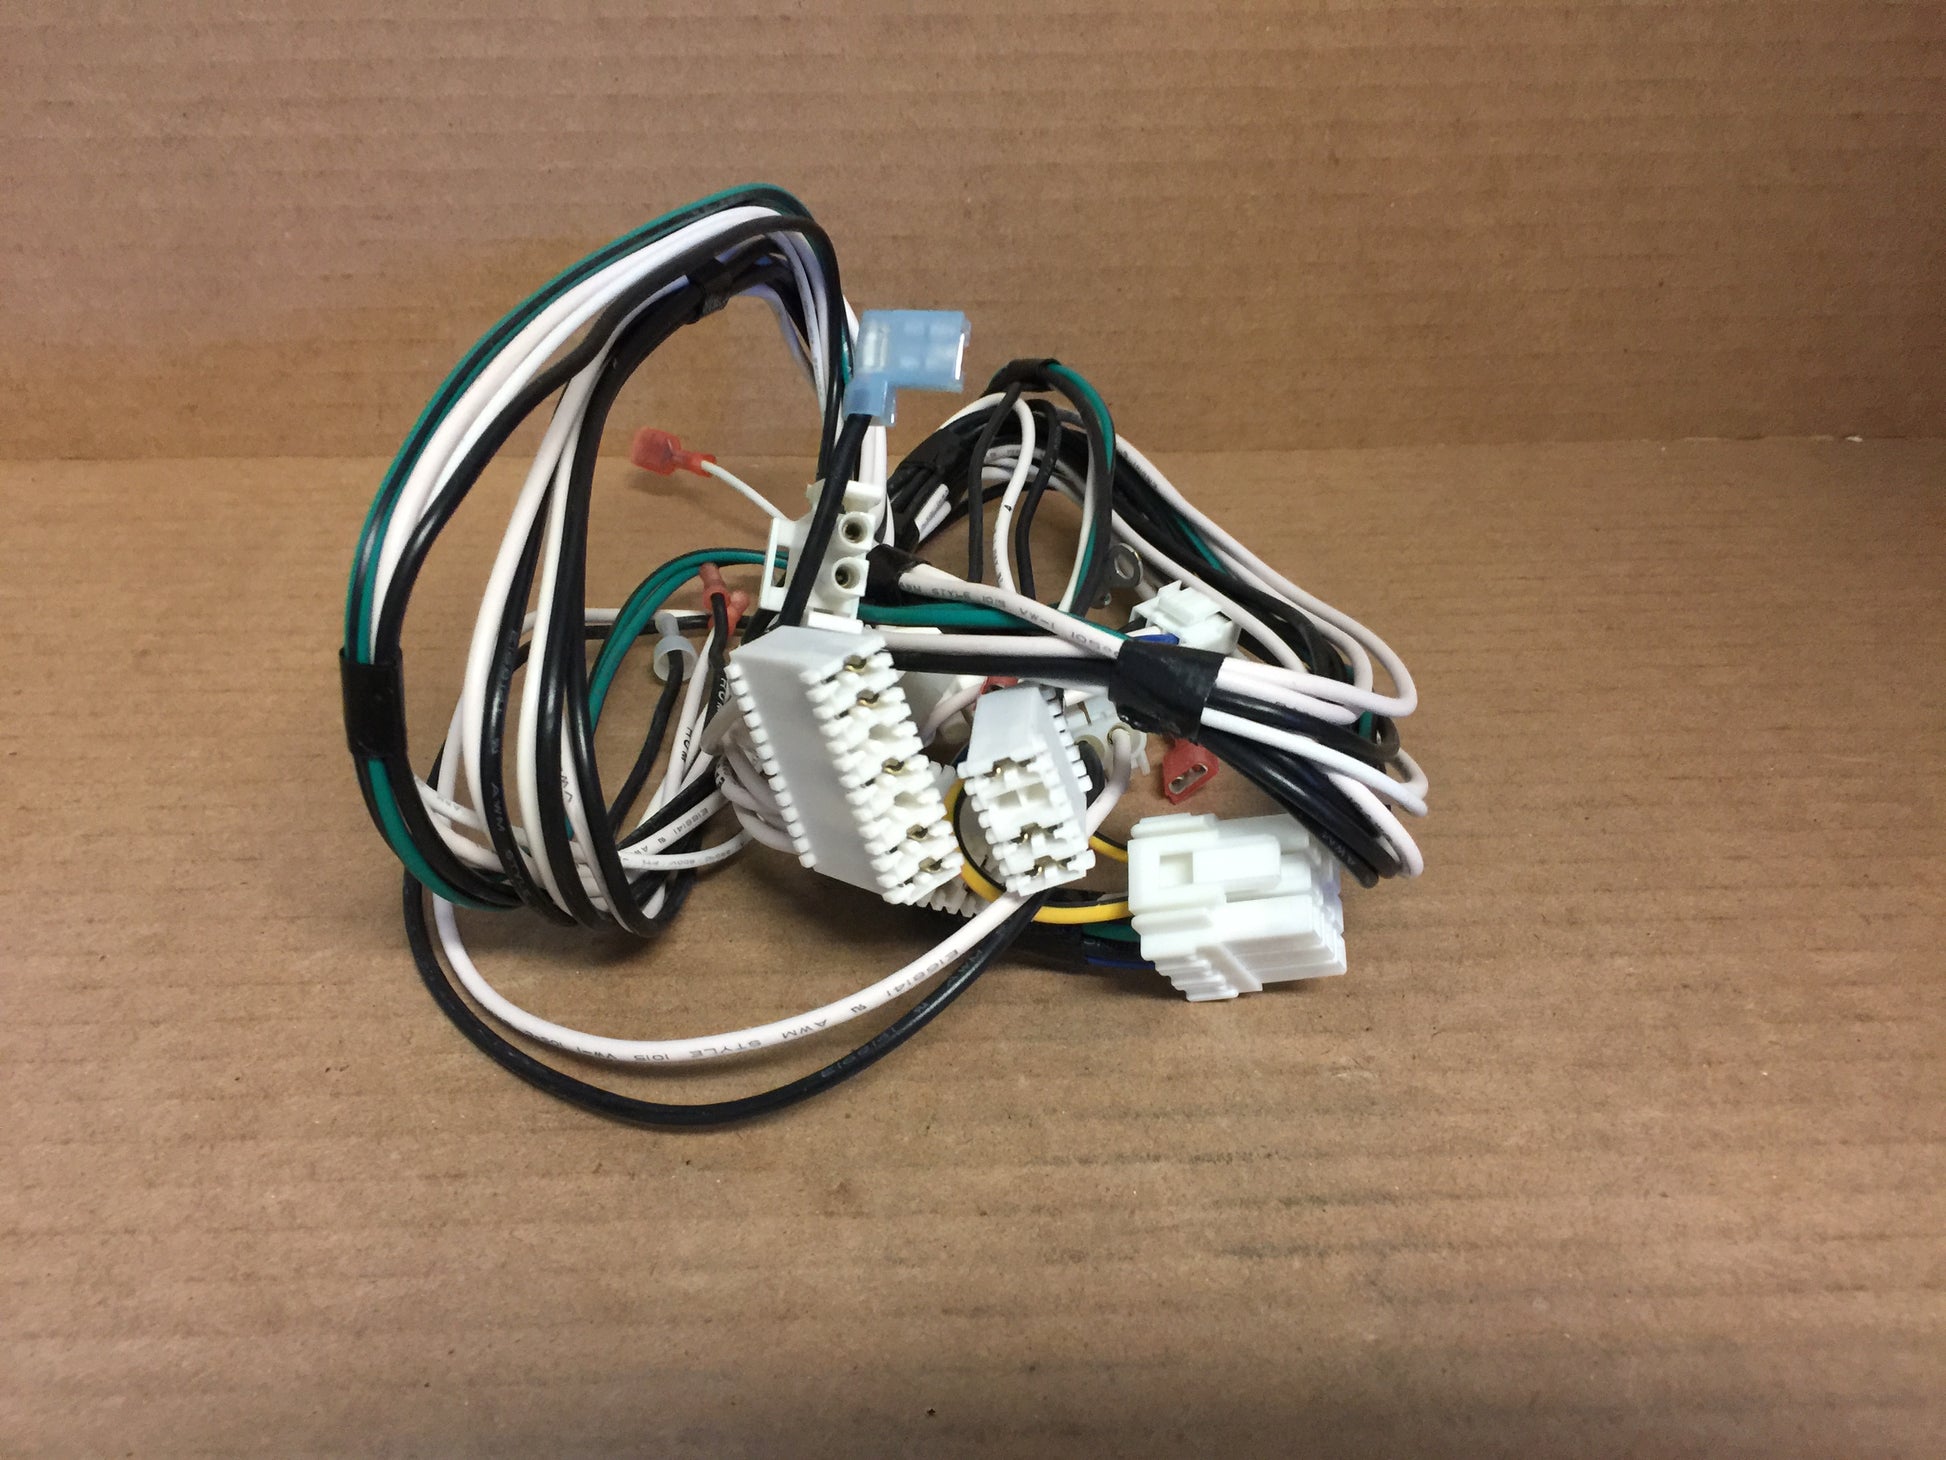 WIRE; HARNESS, CONTROL PANEL, UX3-LONG